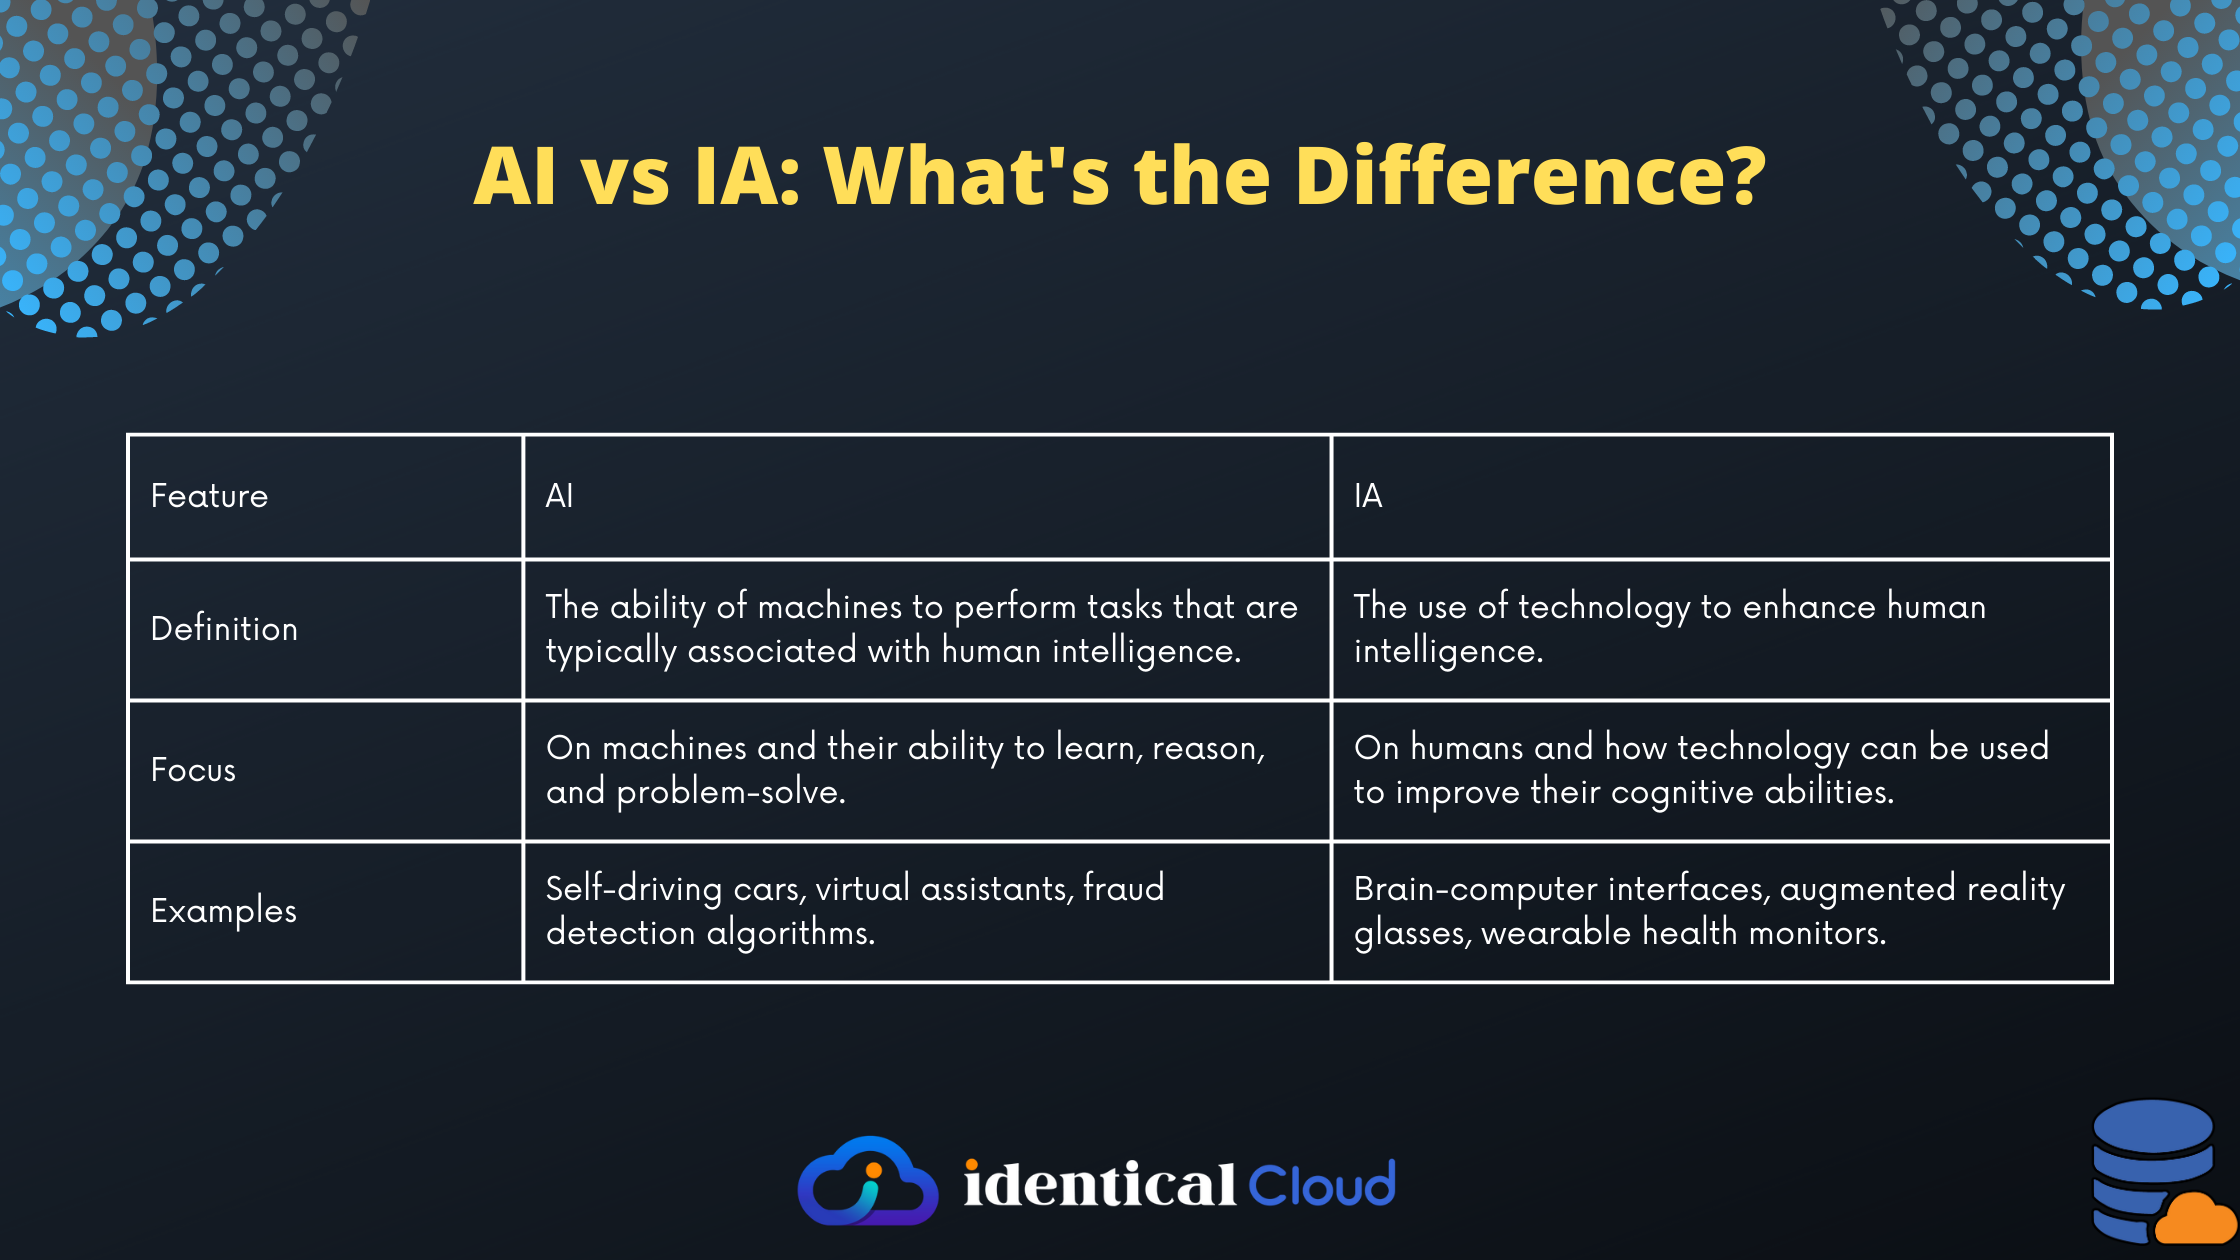 AI vs IA: What's the Difference? - identicalcloud.com